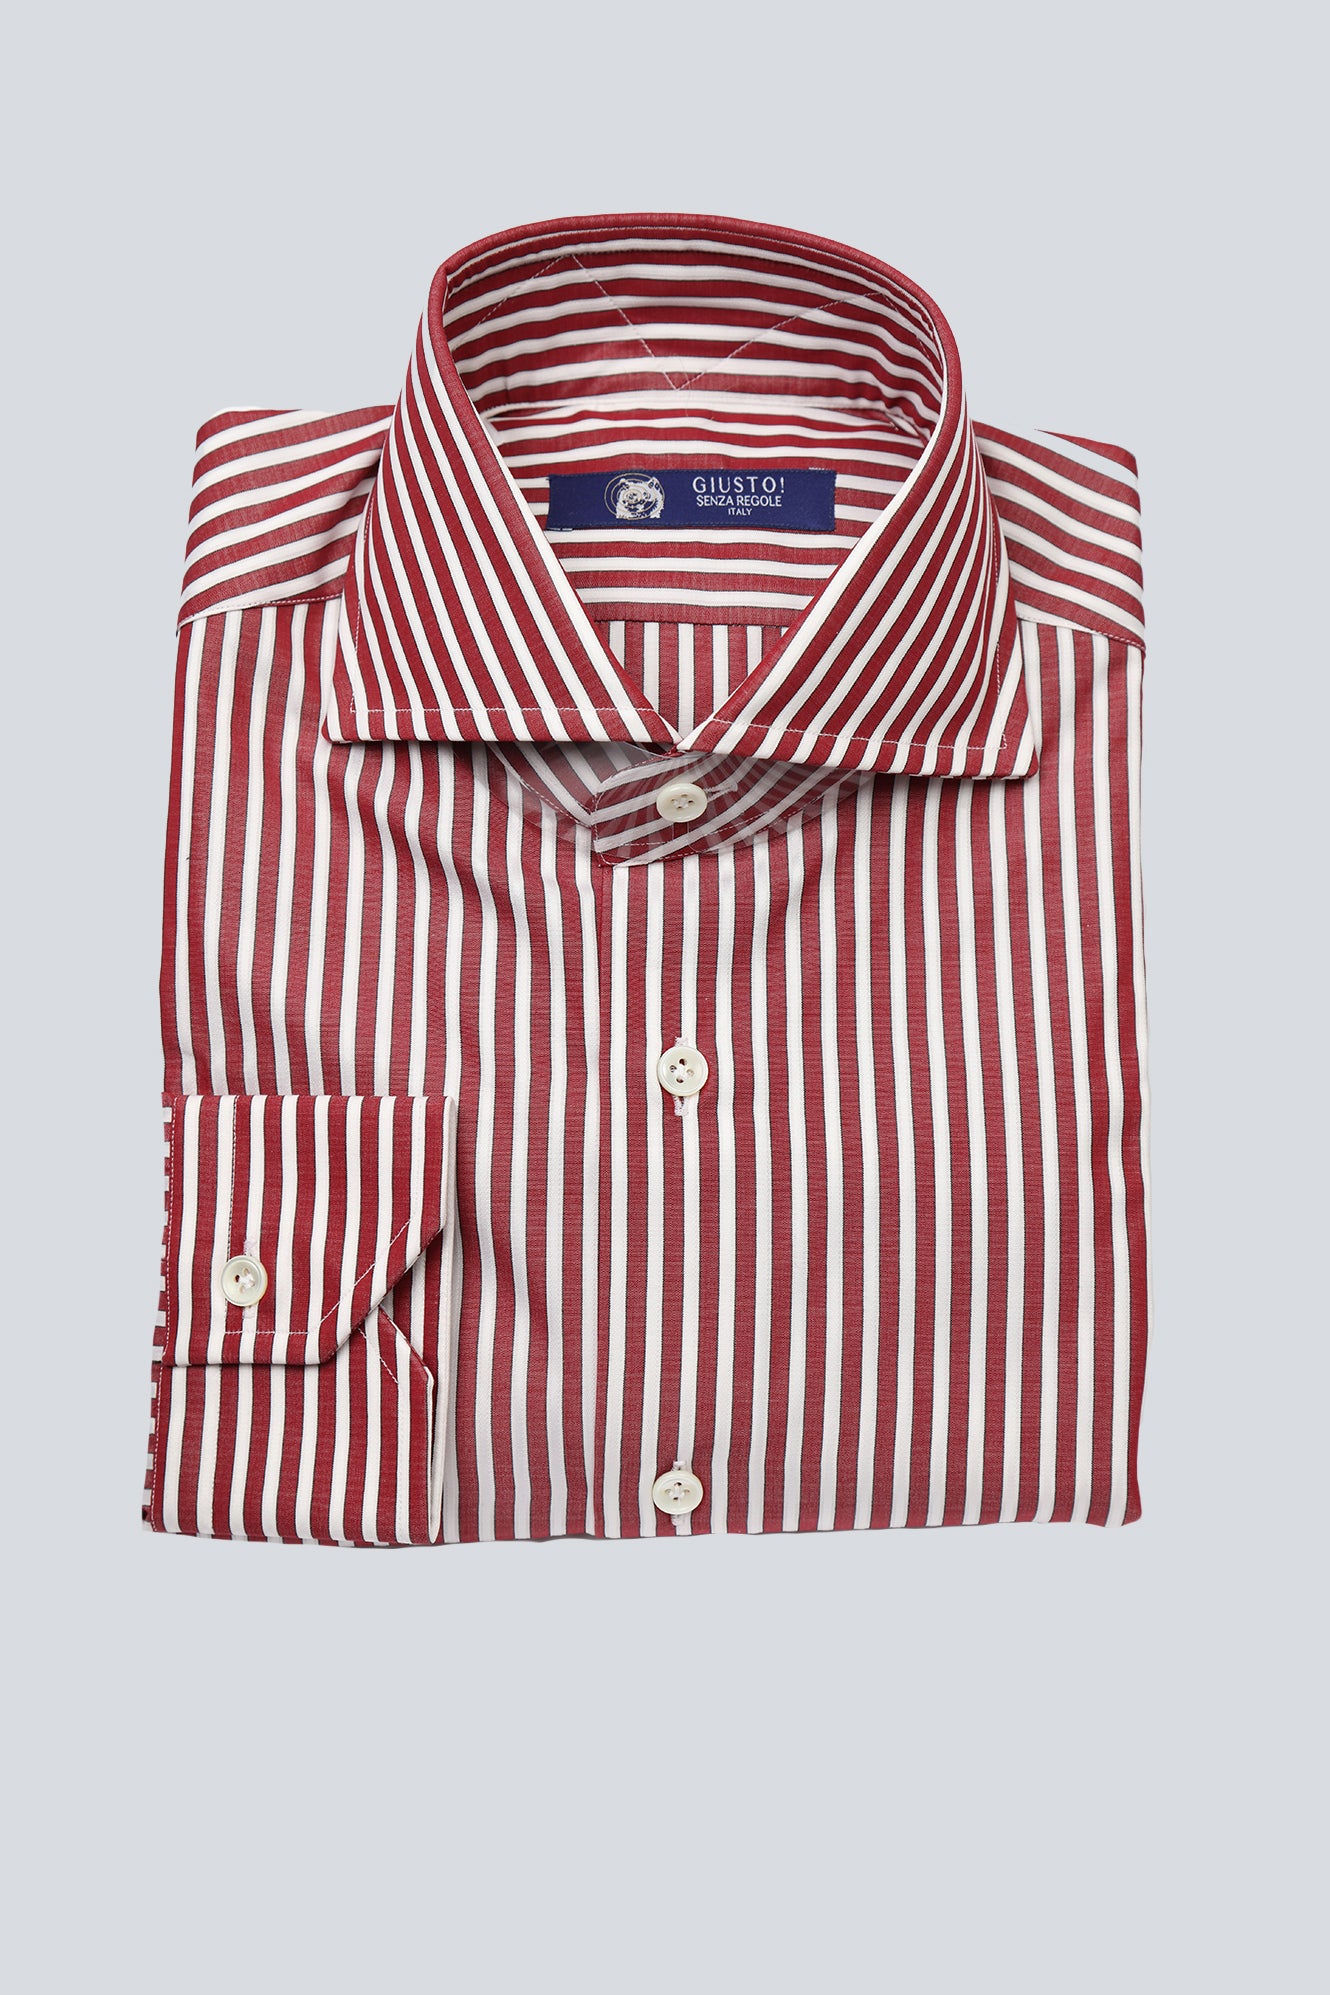 Sehnsucht Red and White Stripped Shirt